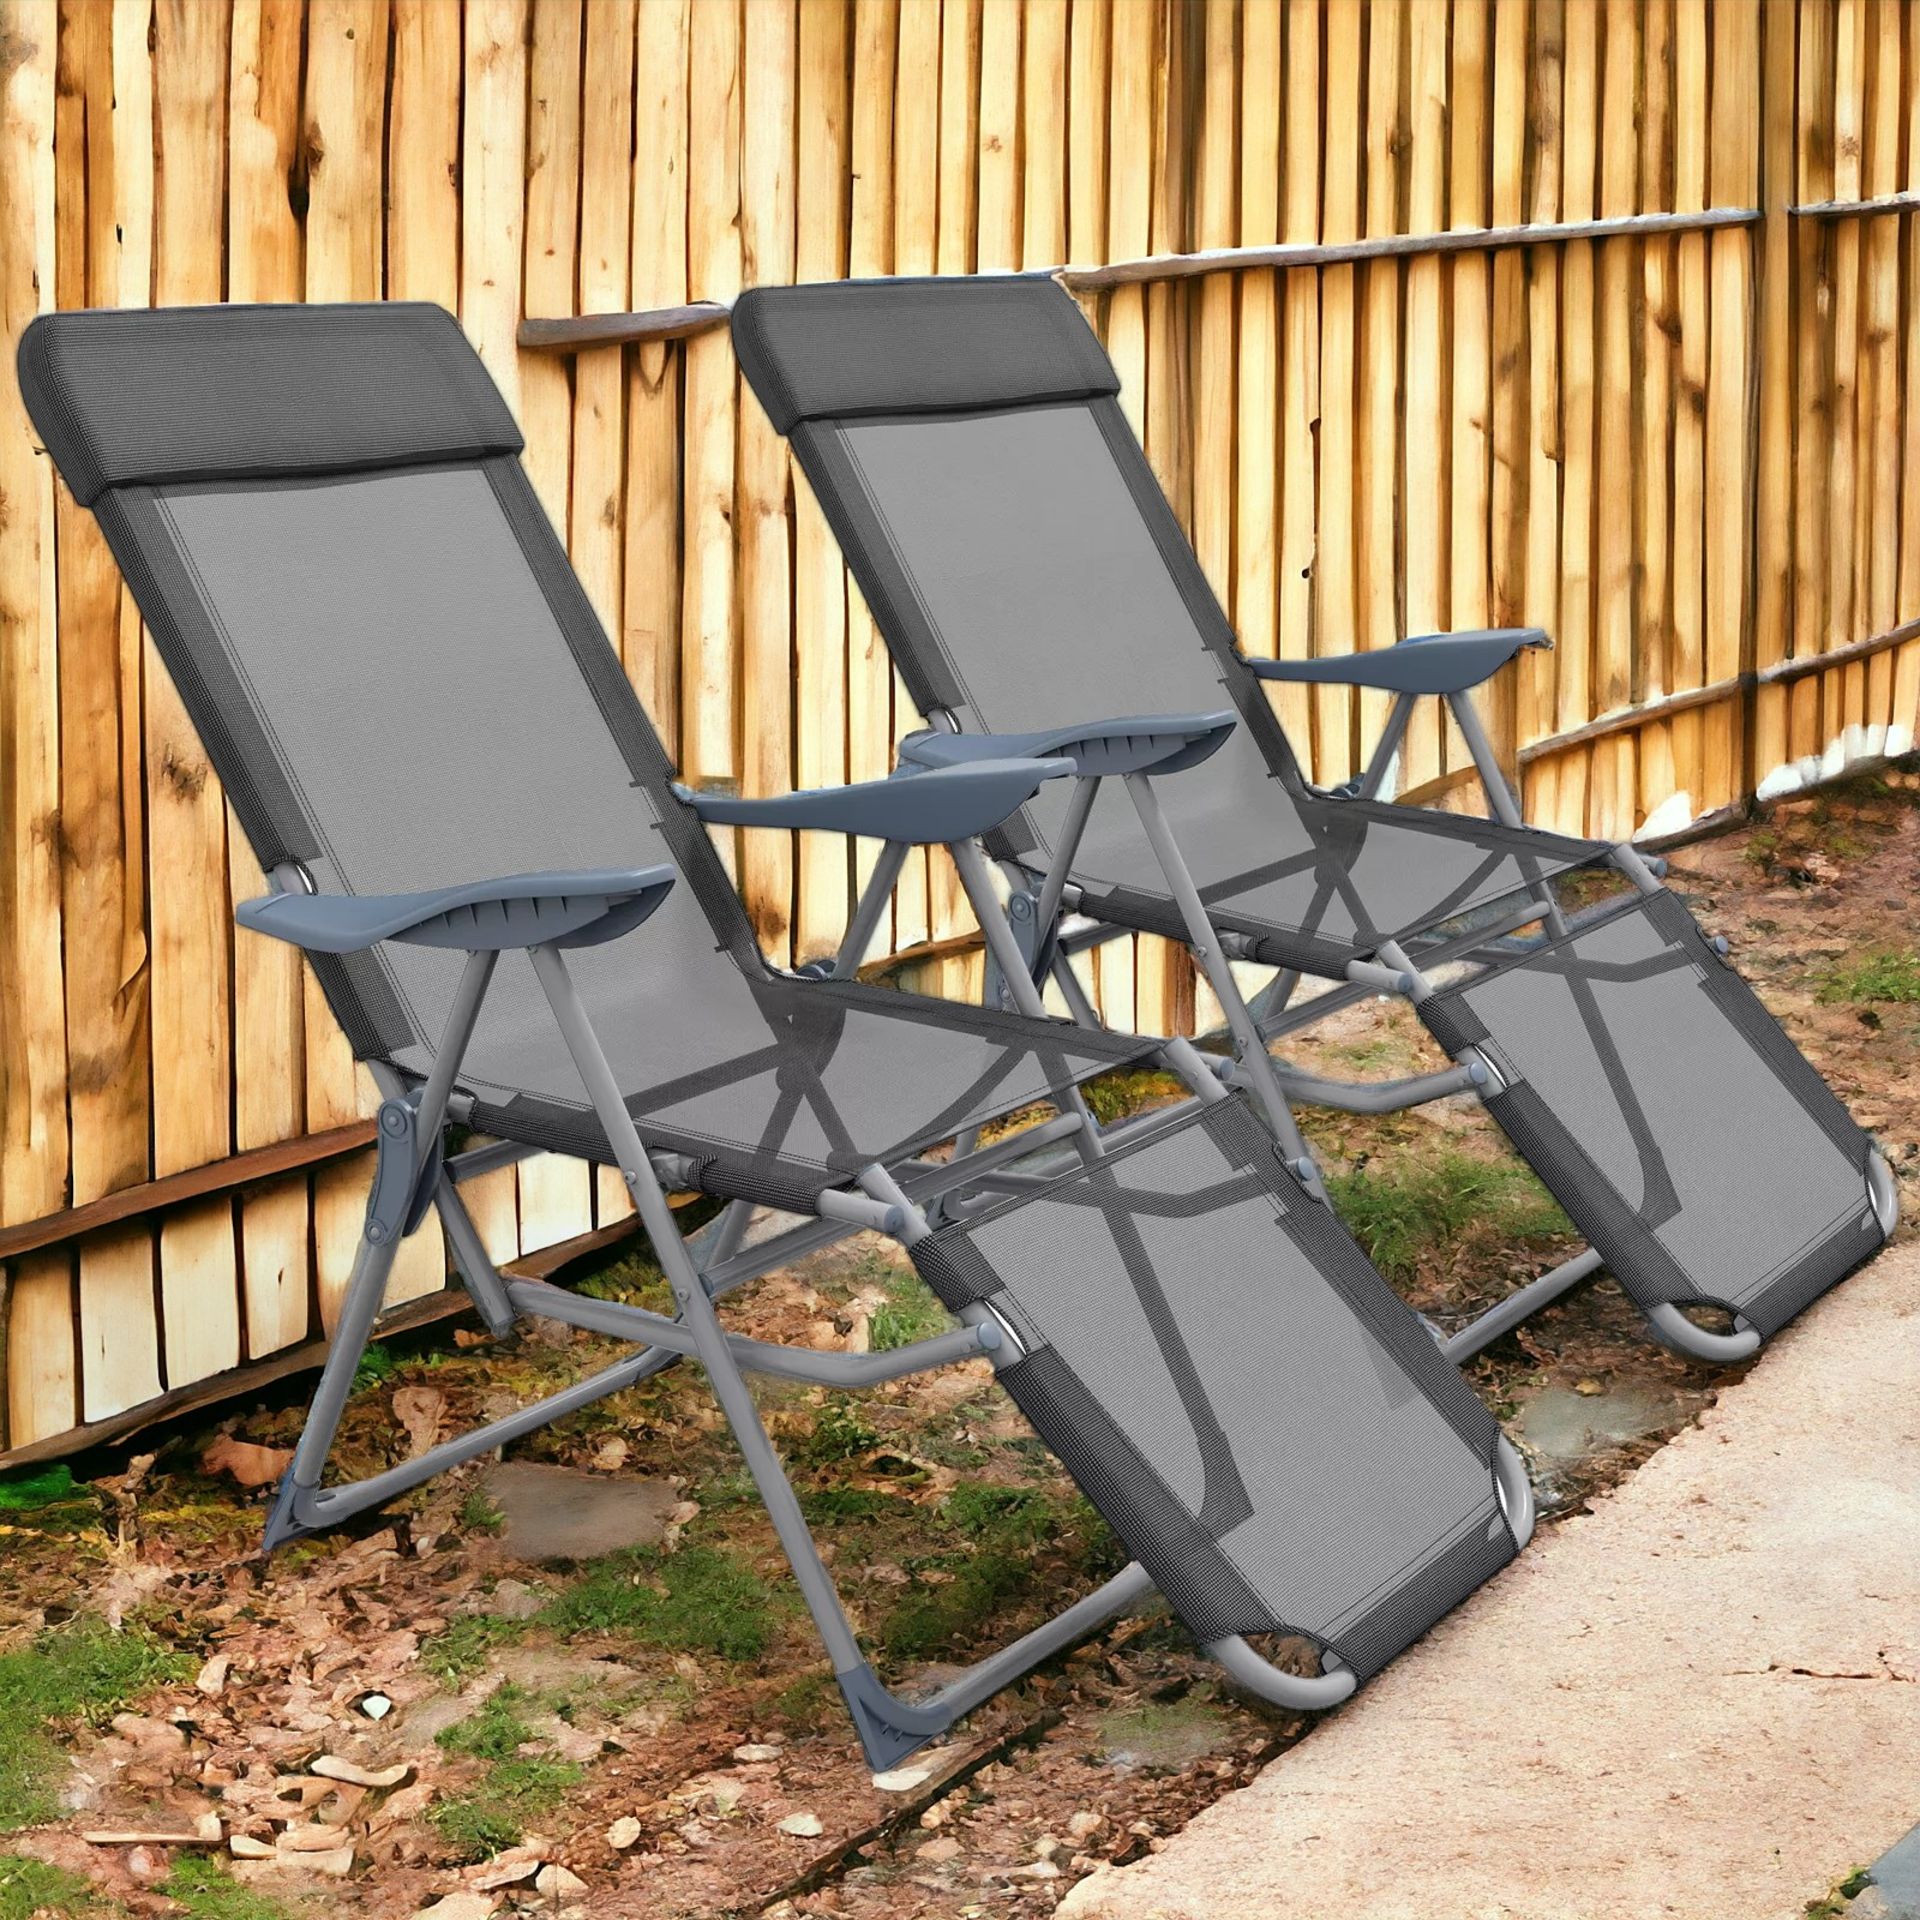 FREE DELIVERY- BRAND NEW RECLINING GARDEN CHAIRS SET OF 2 W/ 5-LEVEL , BLACK